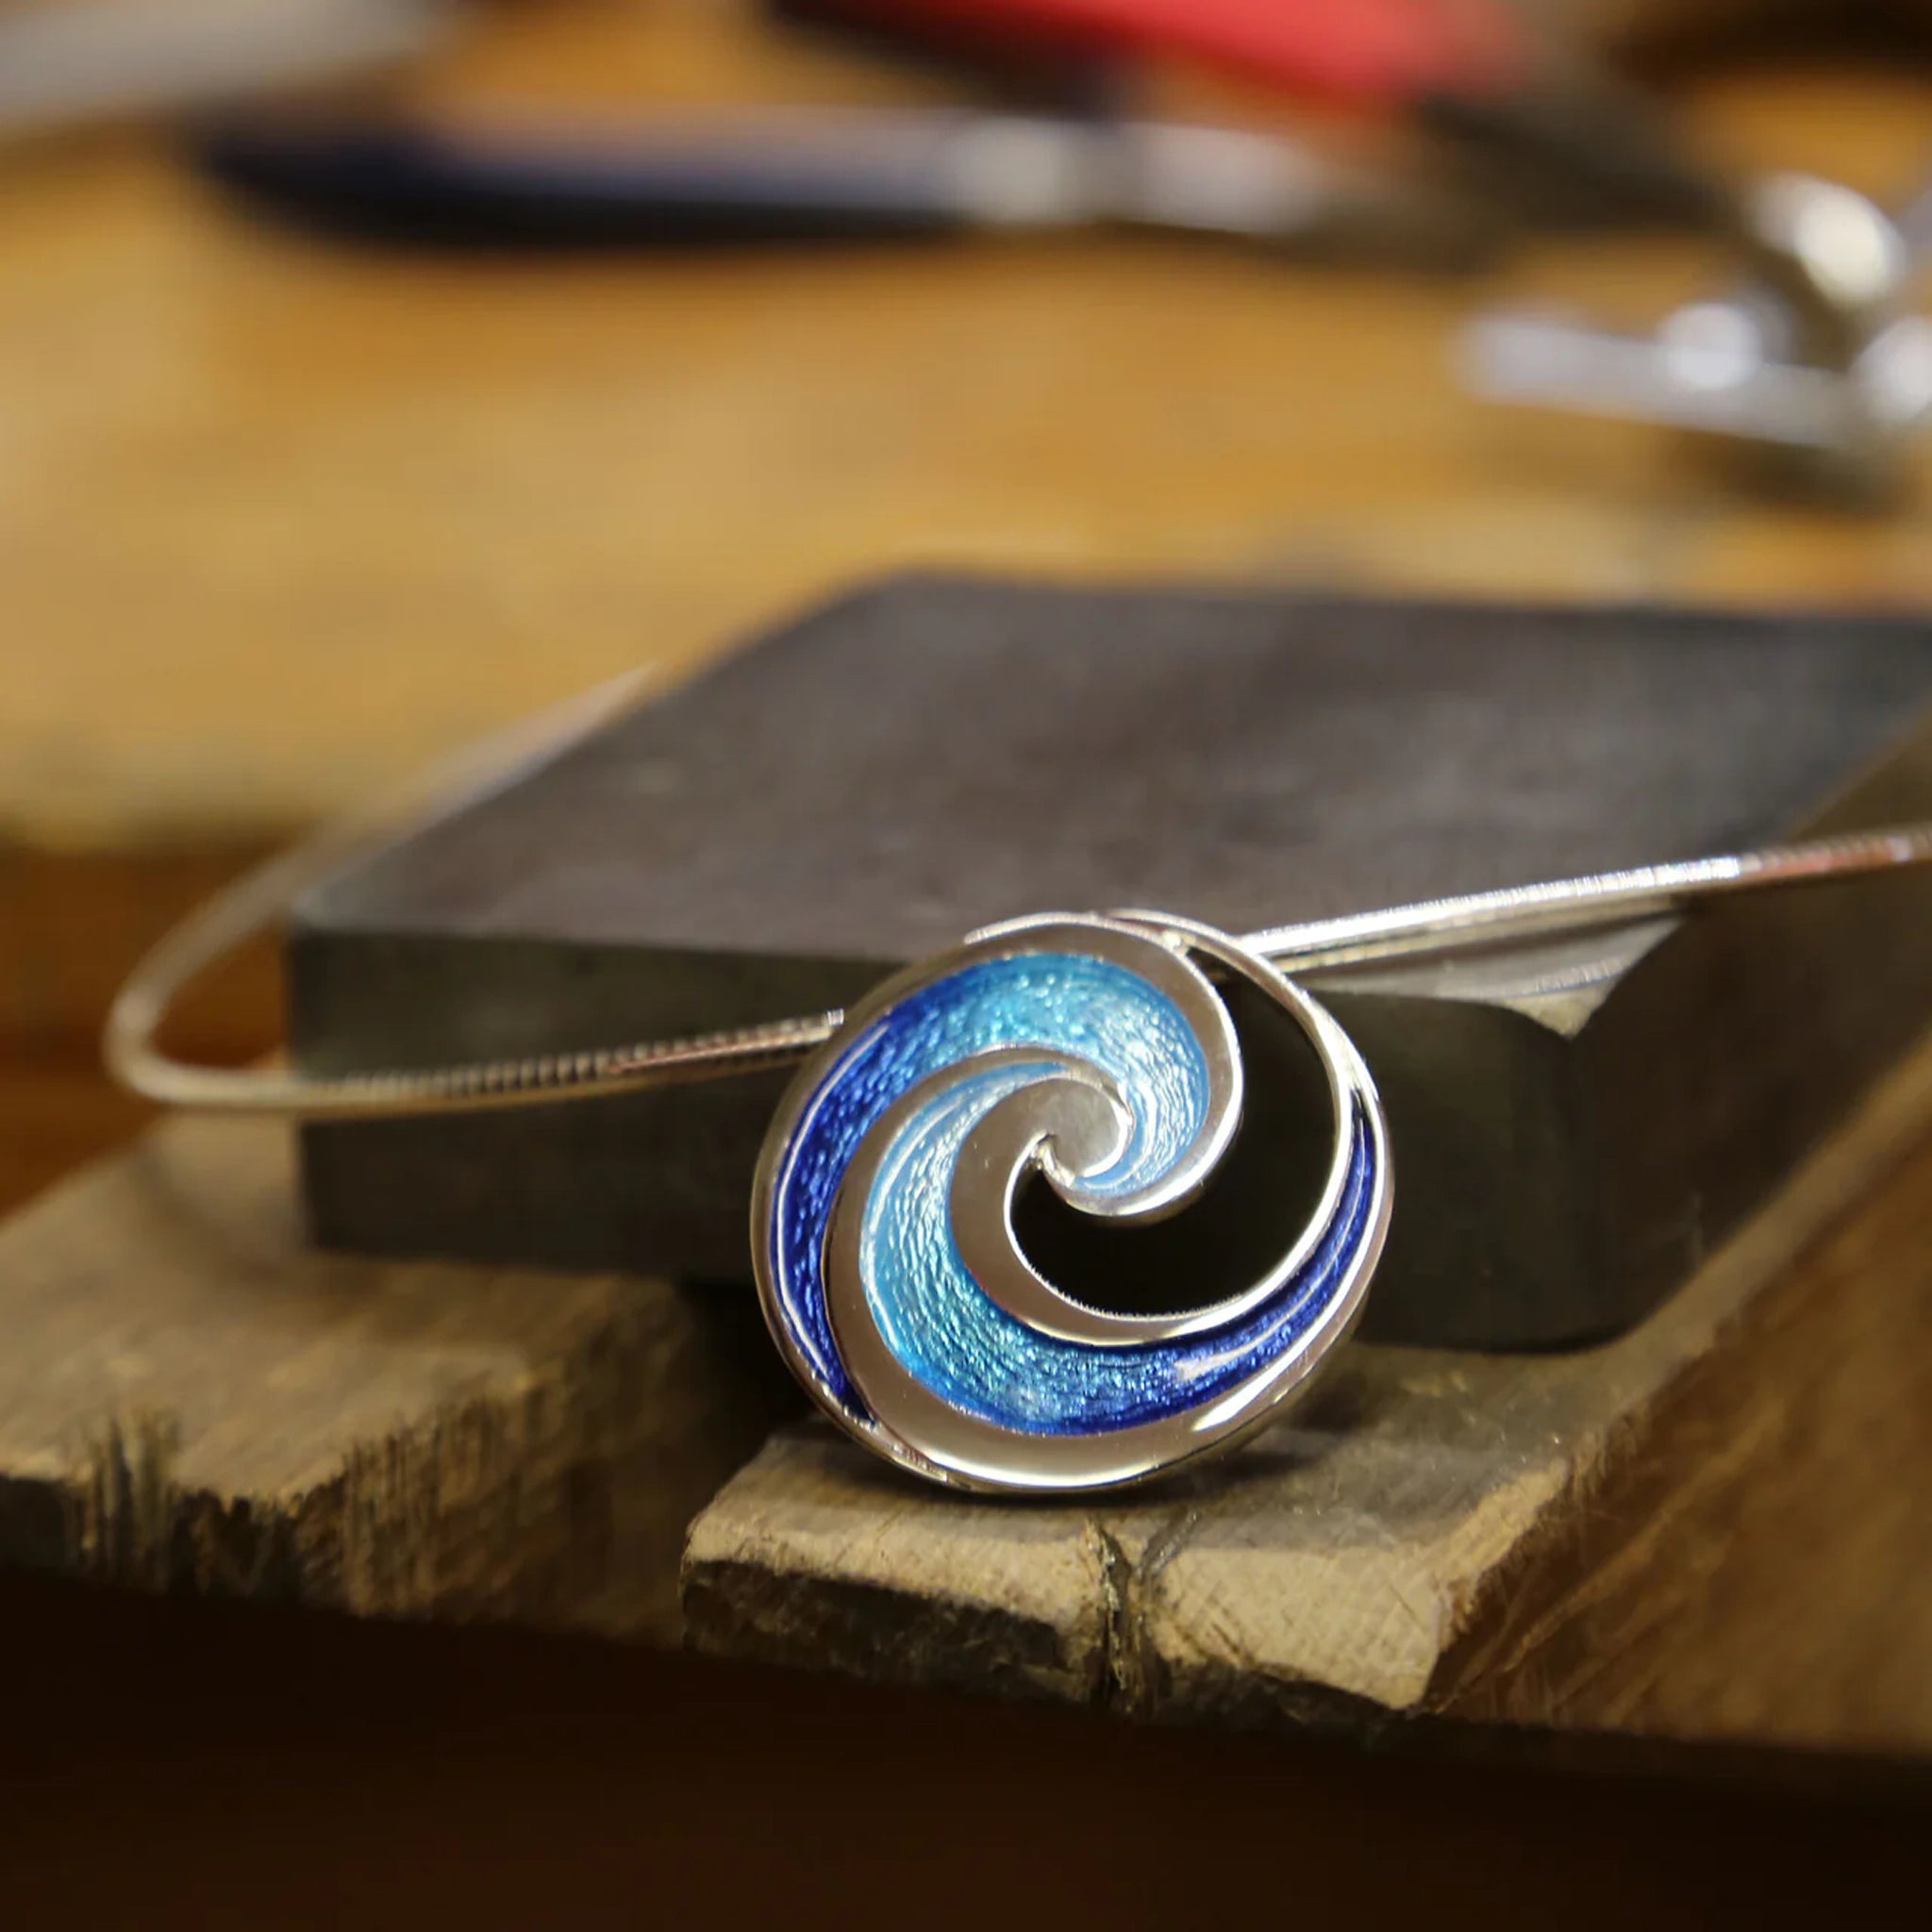 Silver necklet with large round pendant featuring blue enamel ocean wave design on neck wire